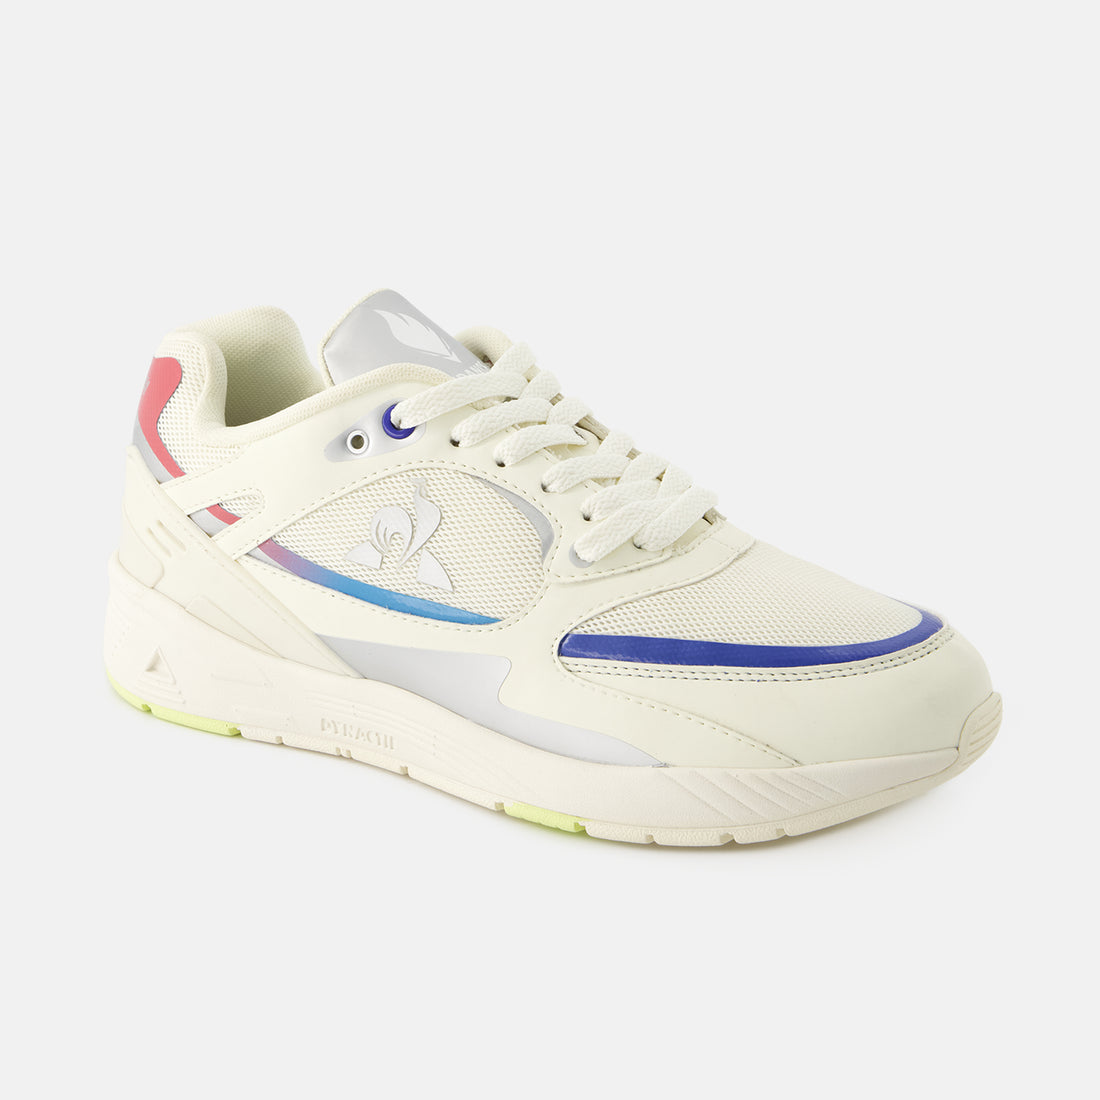 2410369-EFR OLY R1100_2 marshmallow/bbr | Chaussures R1100_2 Equipe de France Unisexe